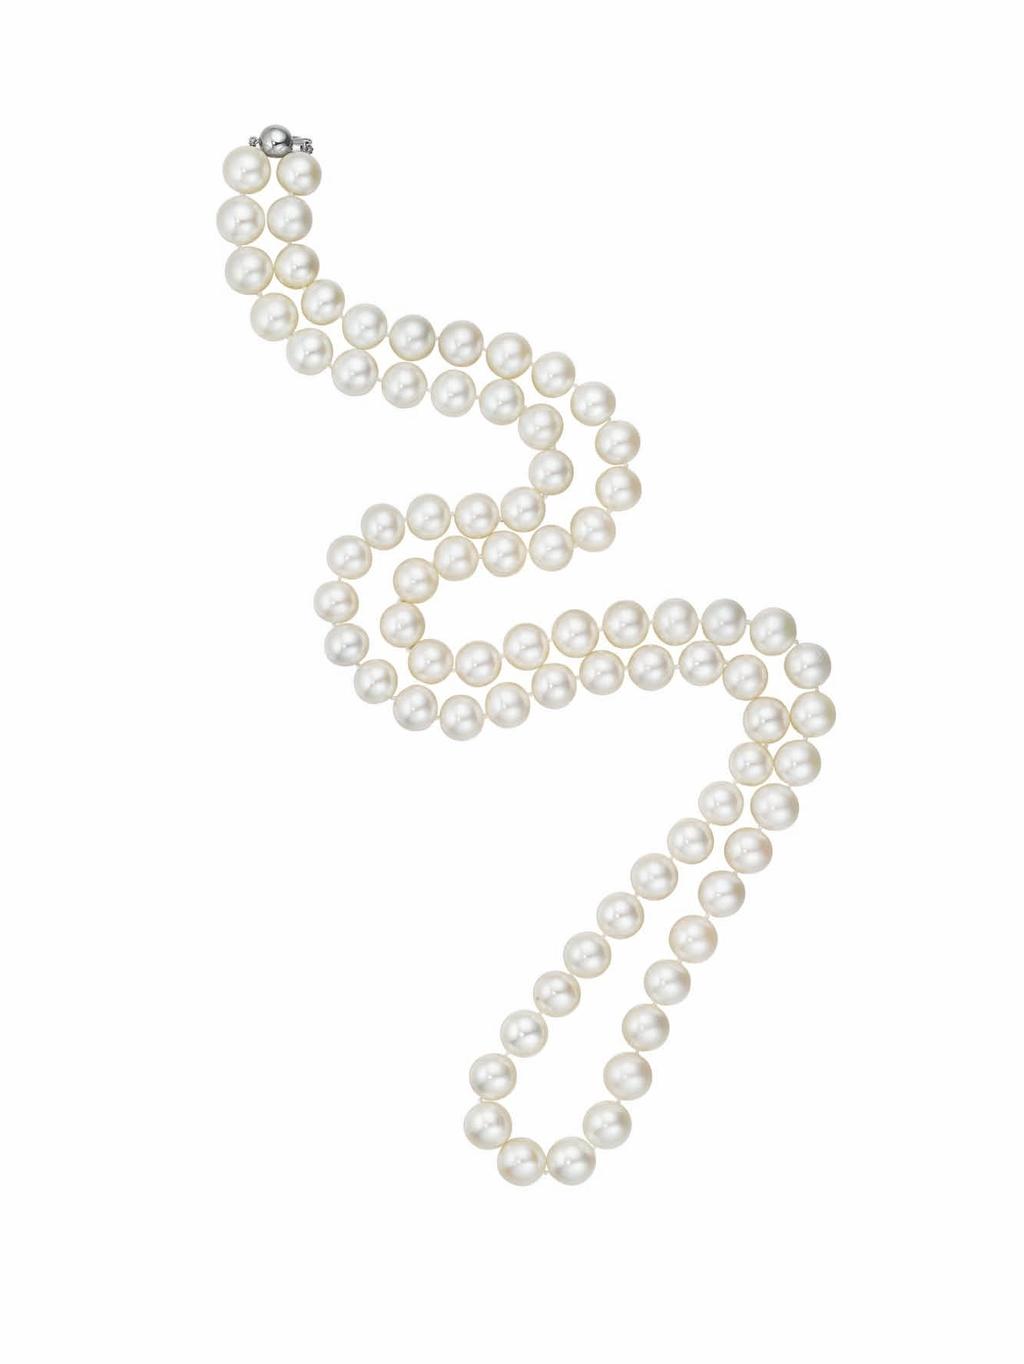 18 19 19 18 A Cultured Pearl Necklace Of seventy-seven white cultured pearls, measuring from approximately 11.50 to 10.37 mm, joined by a polished 18K white gold sphere clasp, length 35 inches.